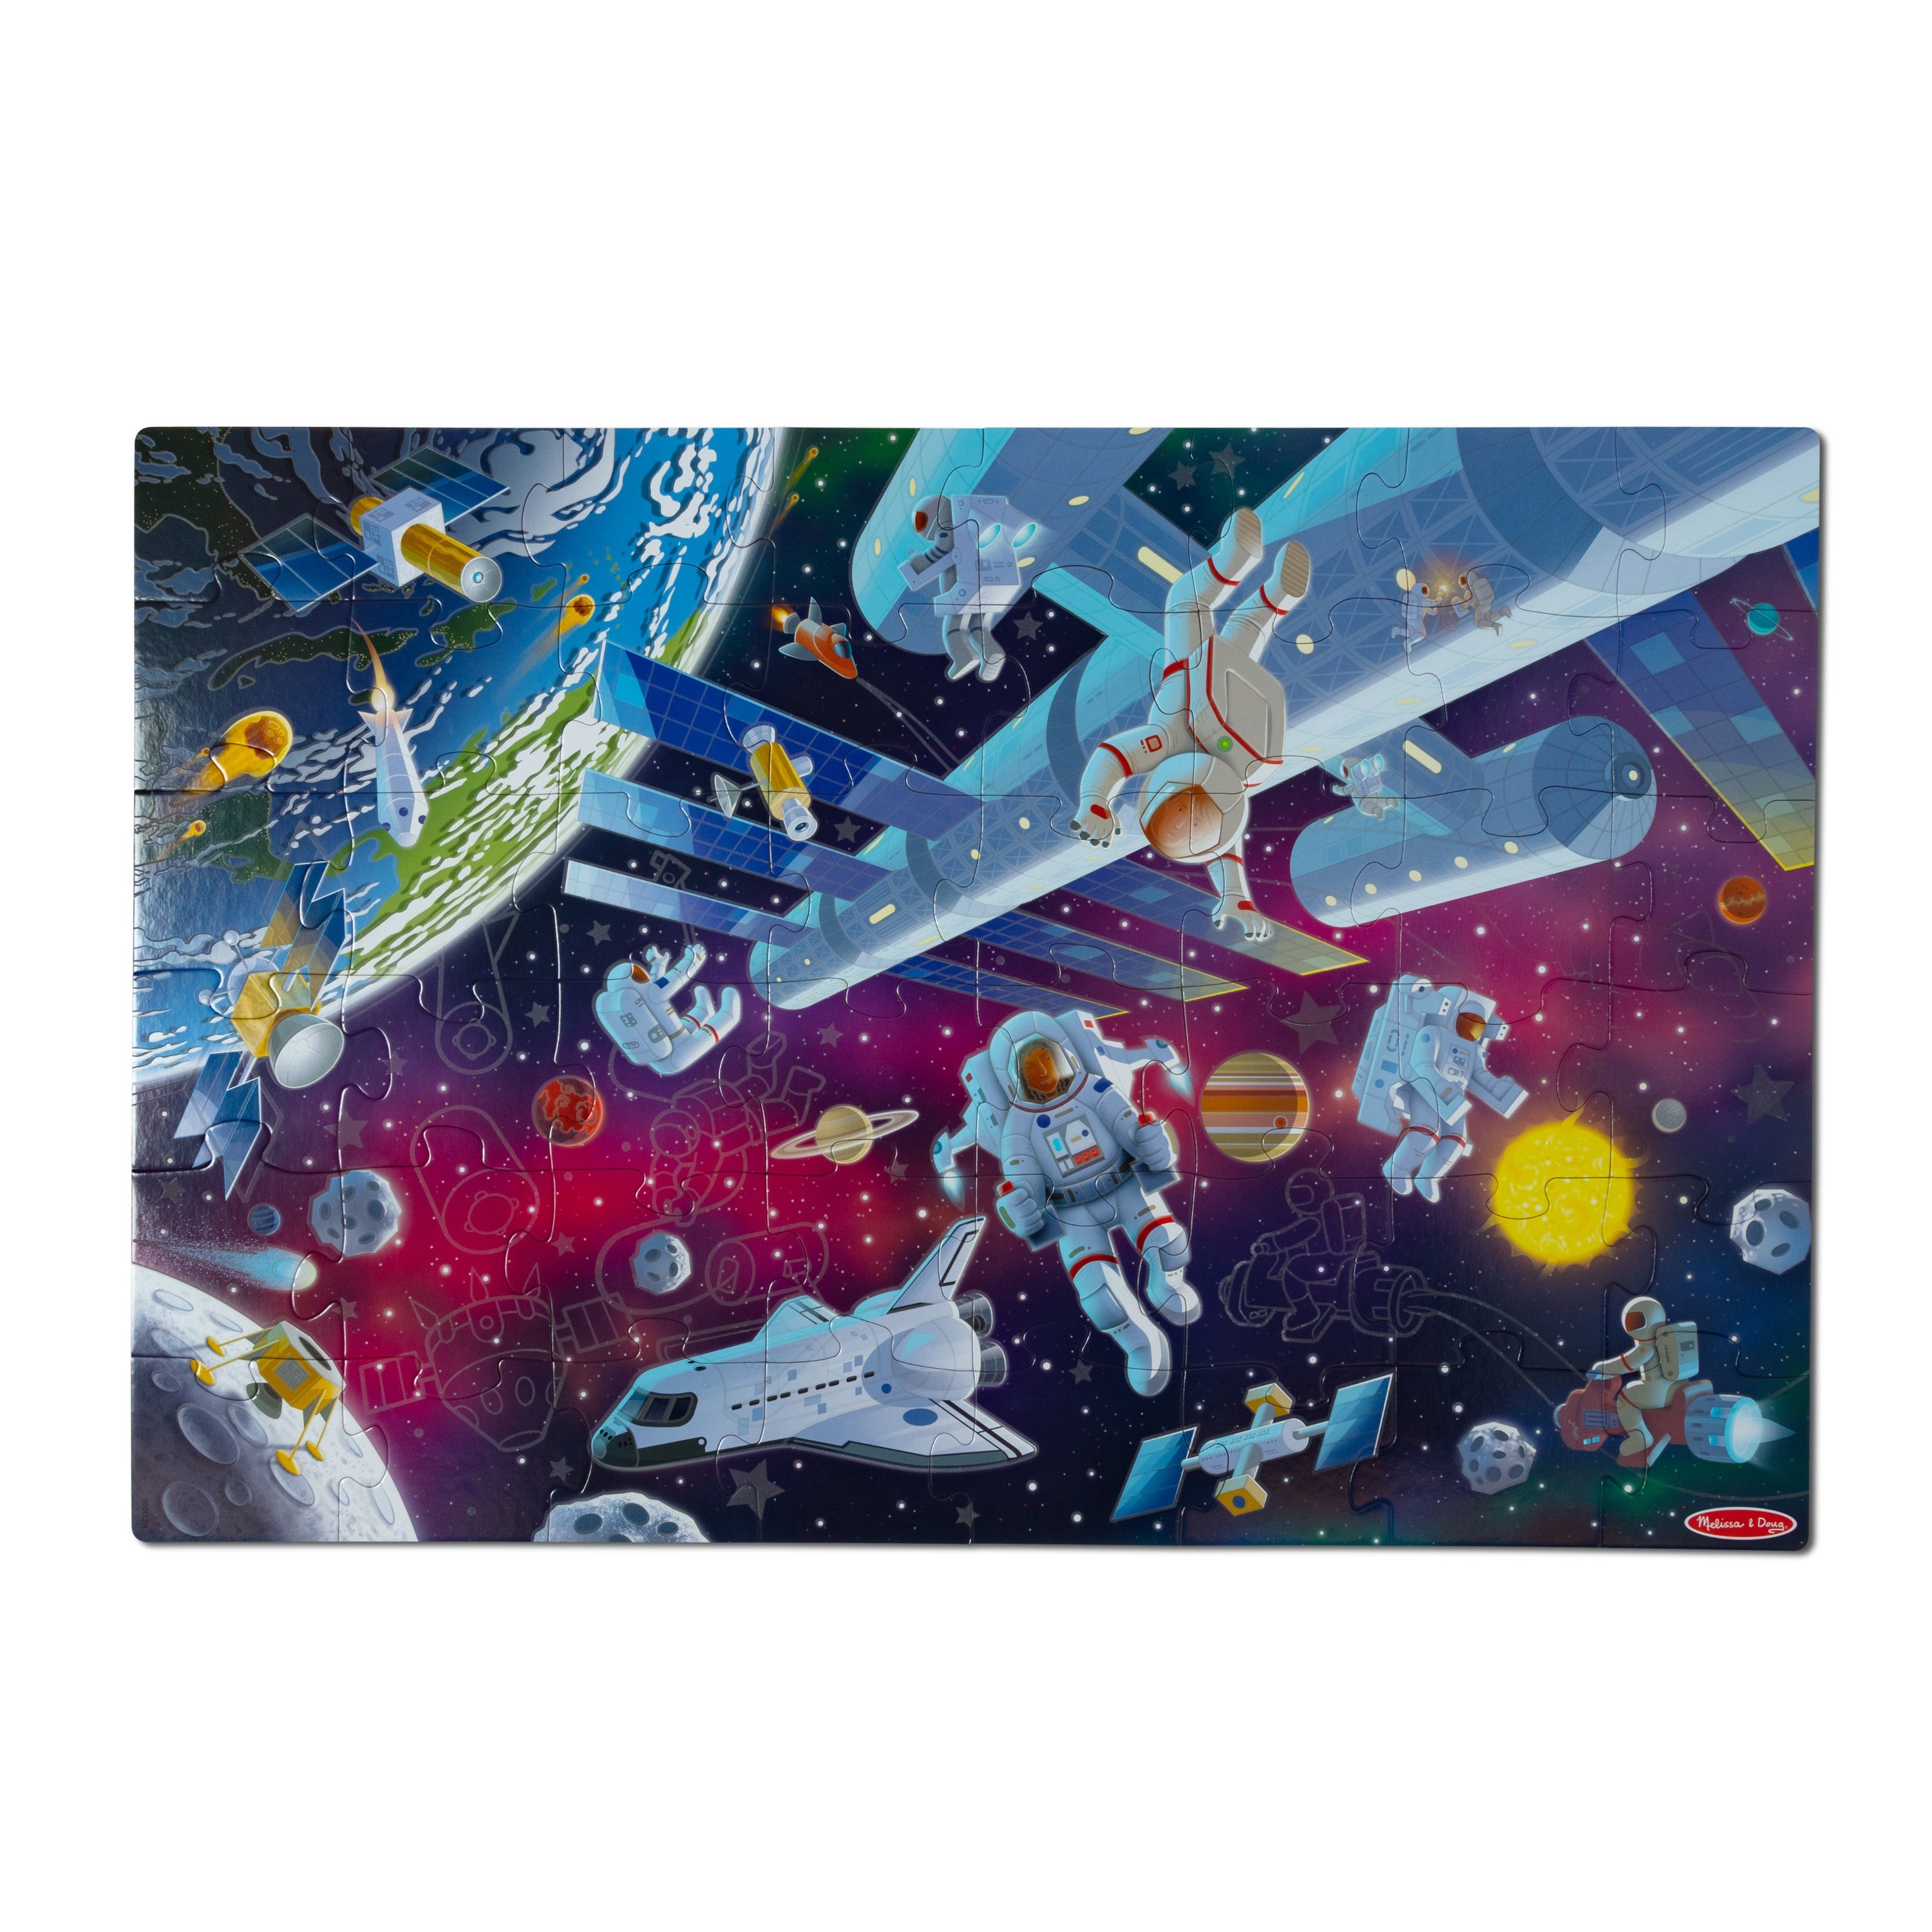 Outer Space Glow-in-the Dark Floor Puzzle Ages 3+ Years